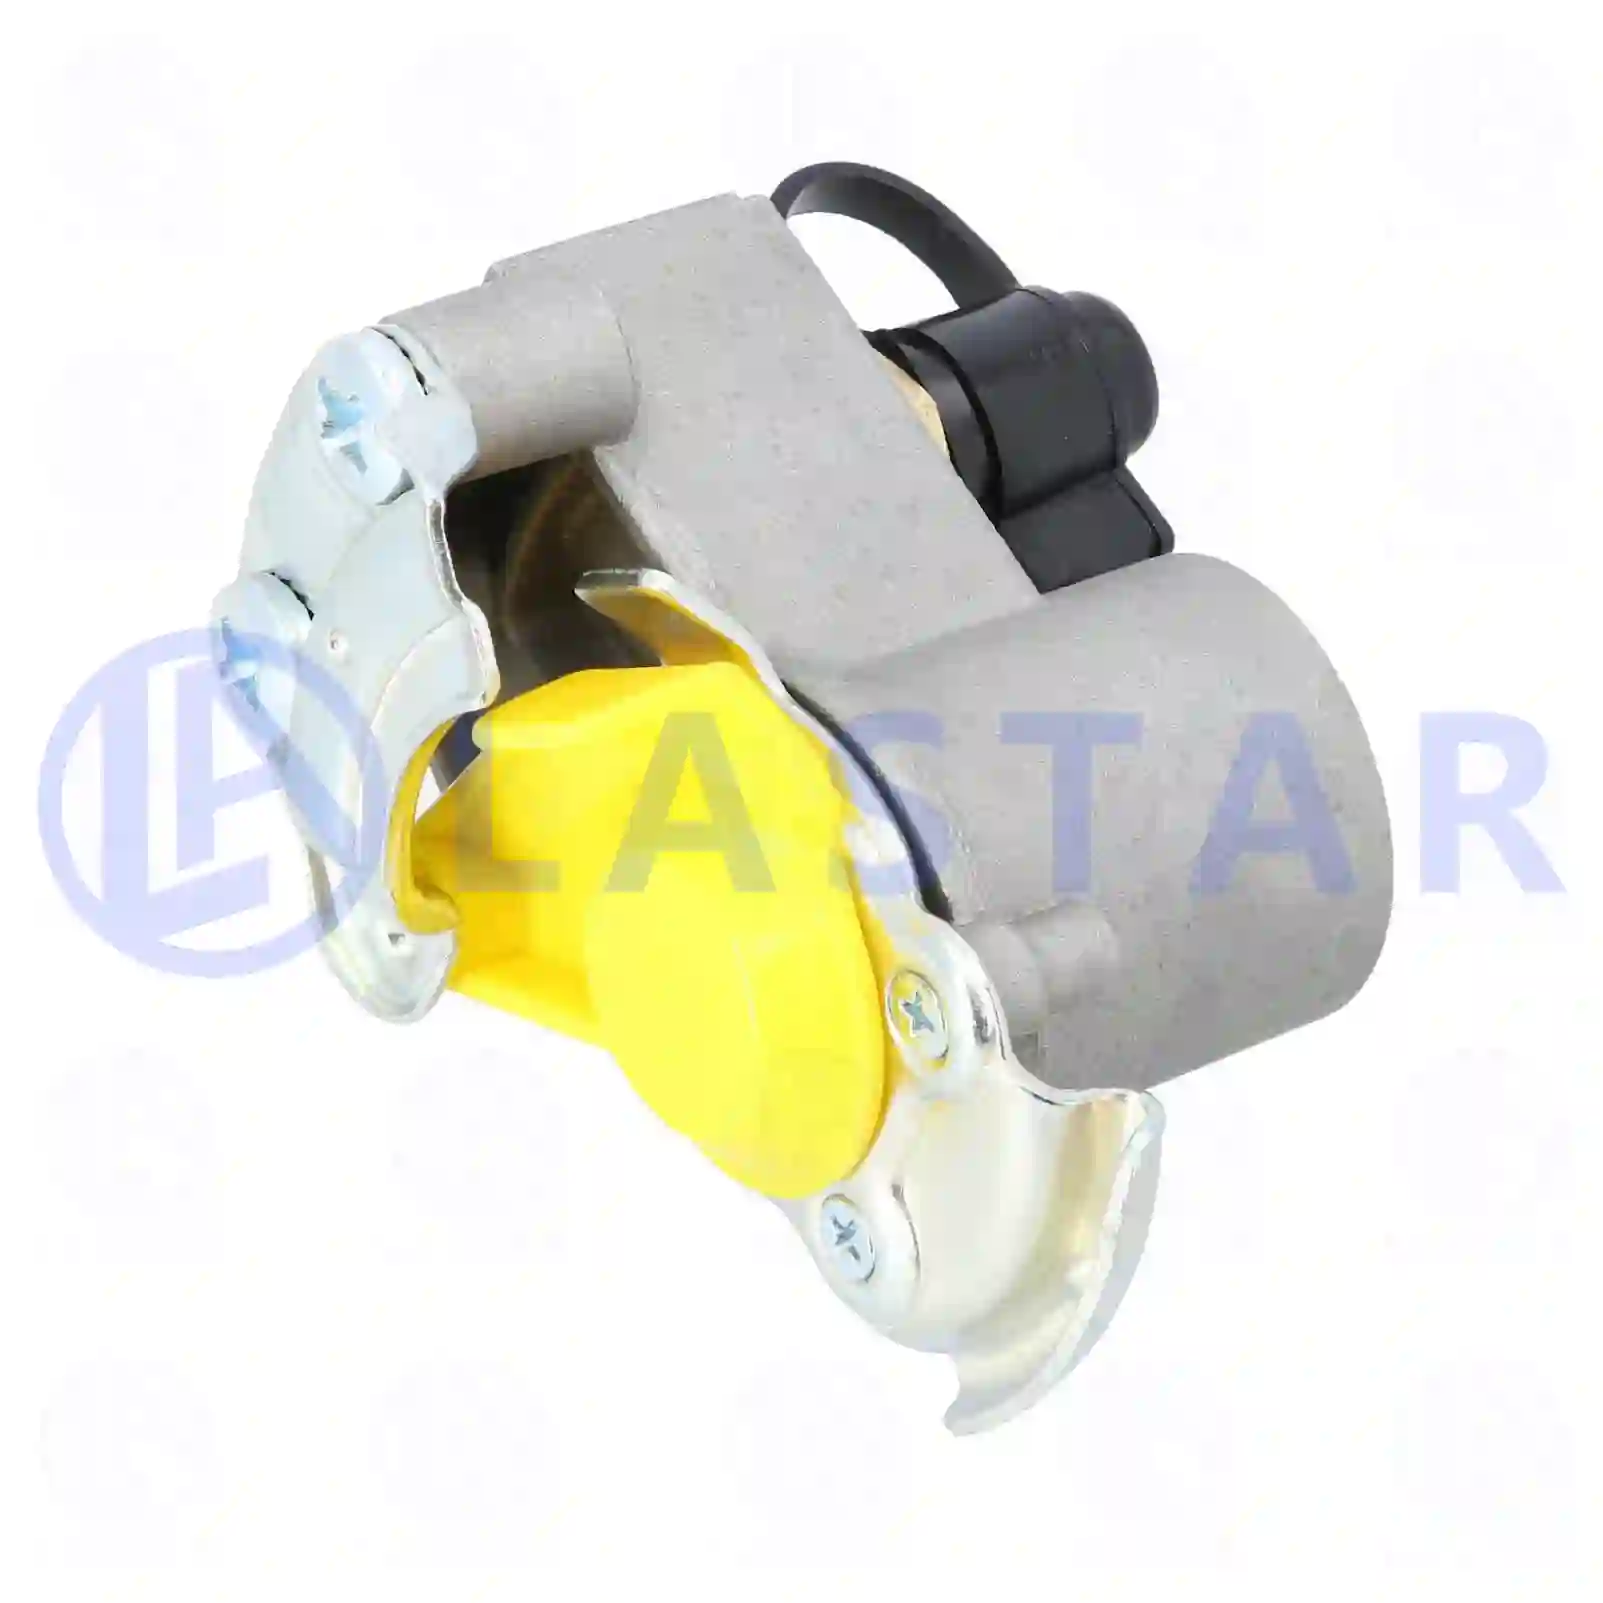 Palm coupling, test connector, yellow lid, 77726003, 1518211, 1935536 ||  77726003 Lastar Spare Part | Truck Spare Parts, Auotomotive Spare Parts Palm coupling, test connector, yellow lid, 77726003, 1518211, 1935536 ||  77726003 Lastar Spare Part | Truck Spare Parts, Auotomotive Spare Parts